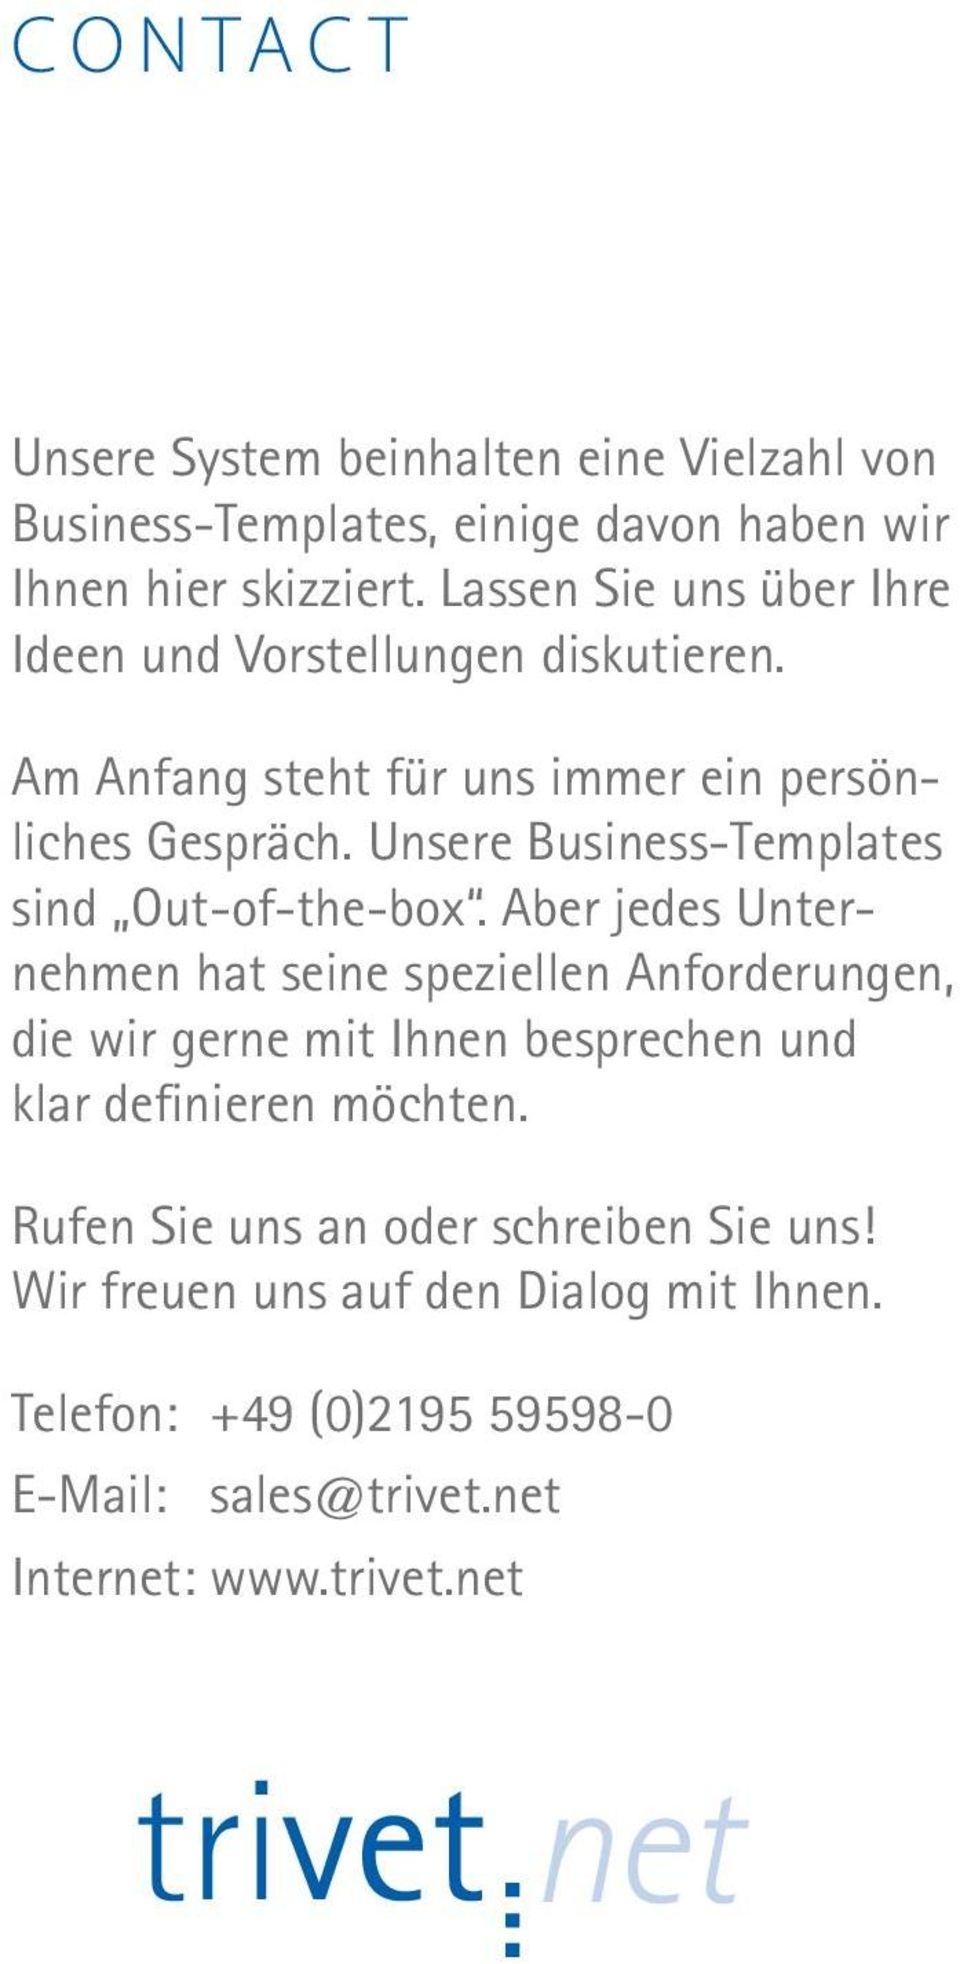 Unsere Business-Templates sind Out-of-the-box.